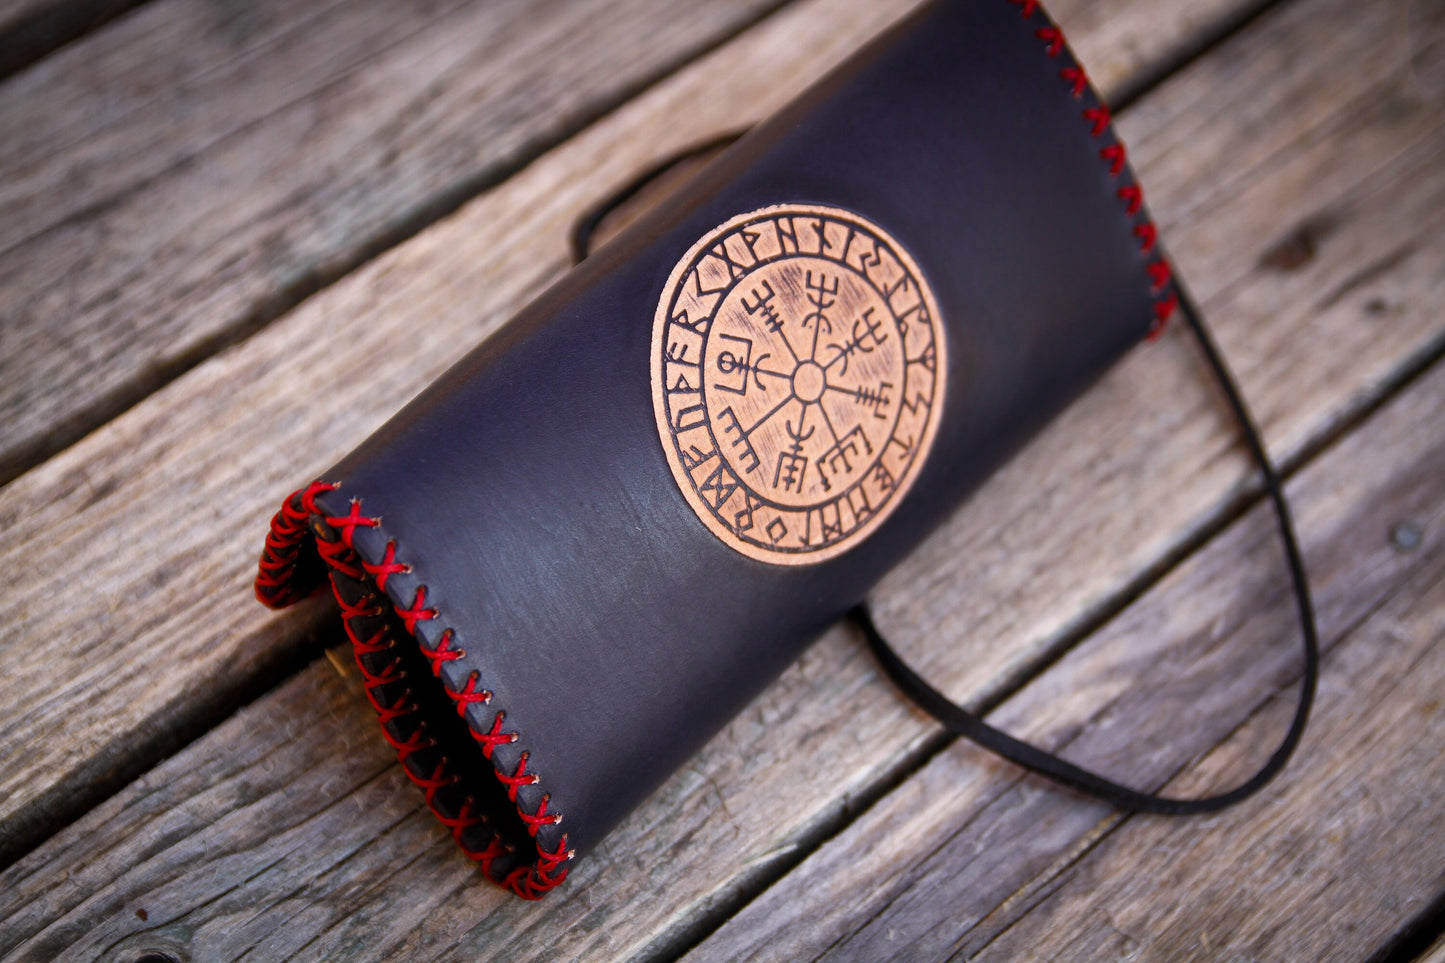 Tobacco pouch leather/tobacco pouch leather/tobacco pouch Vegvisir/Norse compass/rolling tobacco pouch/roll pouch leather/Father's Day gift